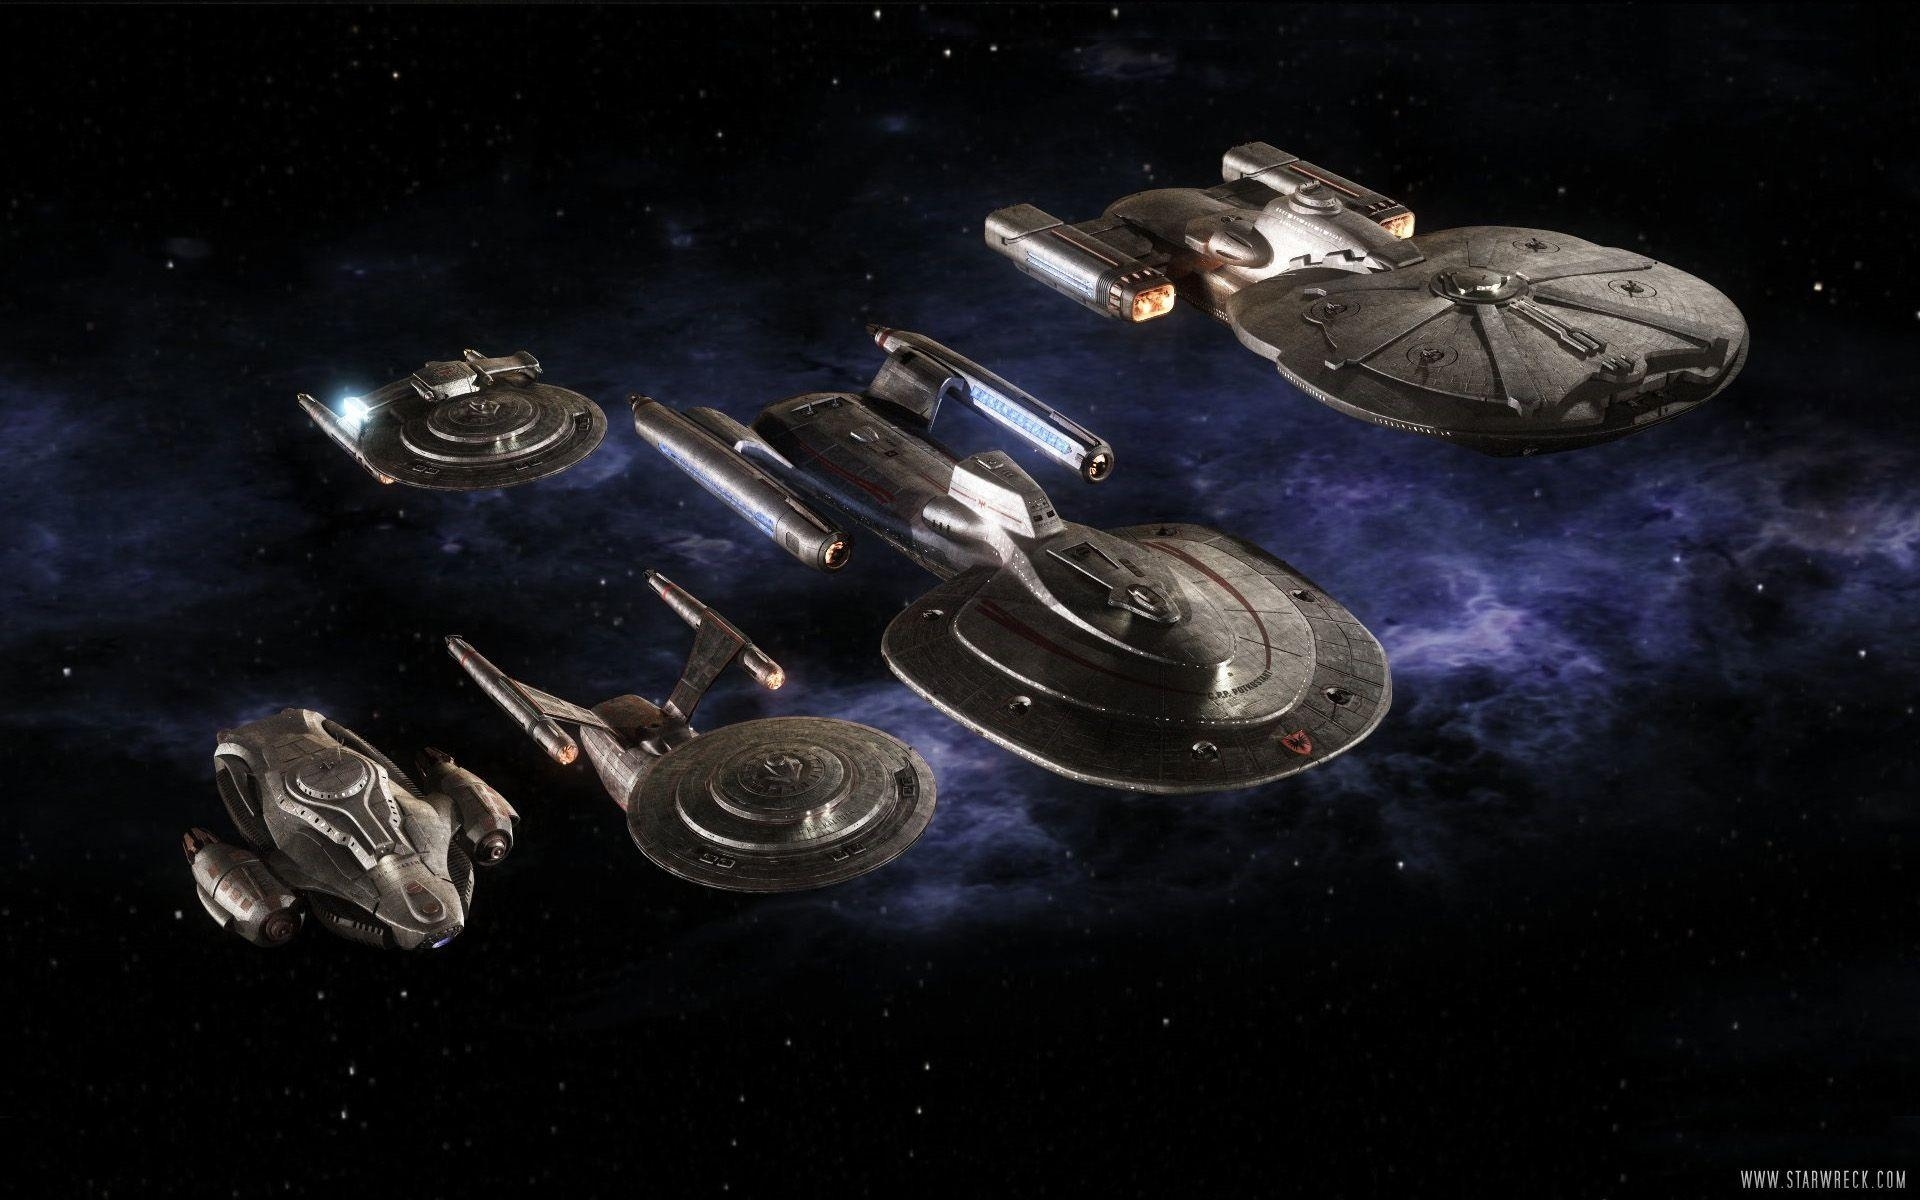 10 Top Star Trek Ship Wallpapers FULL HD 1920×1080 For PC Background